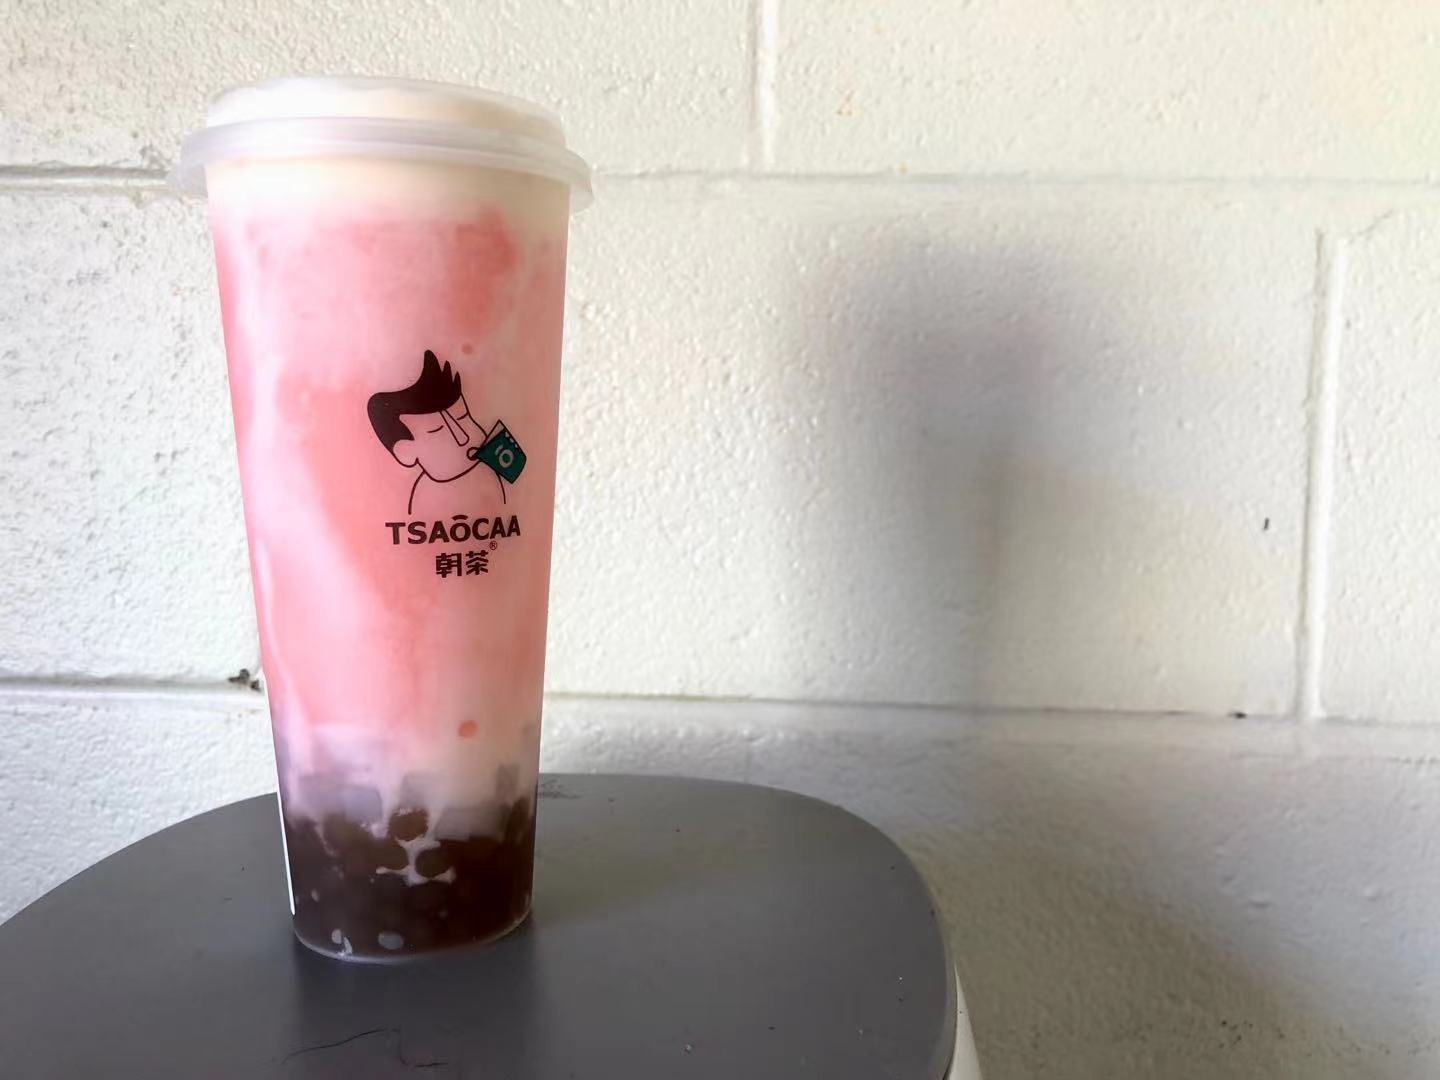 On a black circular table, there is a pink boba drink in a plastic cup that reads: Tsaoom. Photo by Xiaohui Zhang.